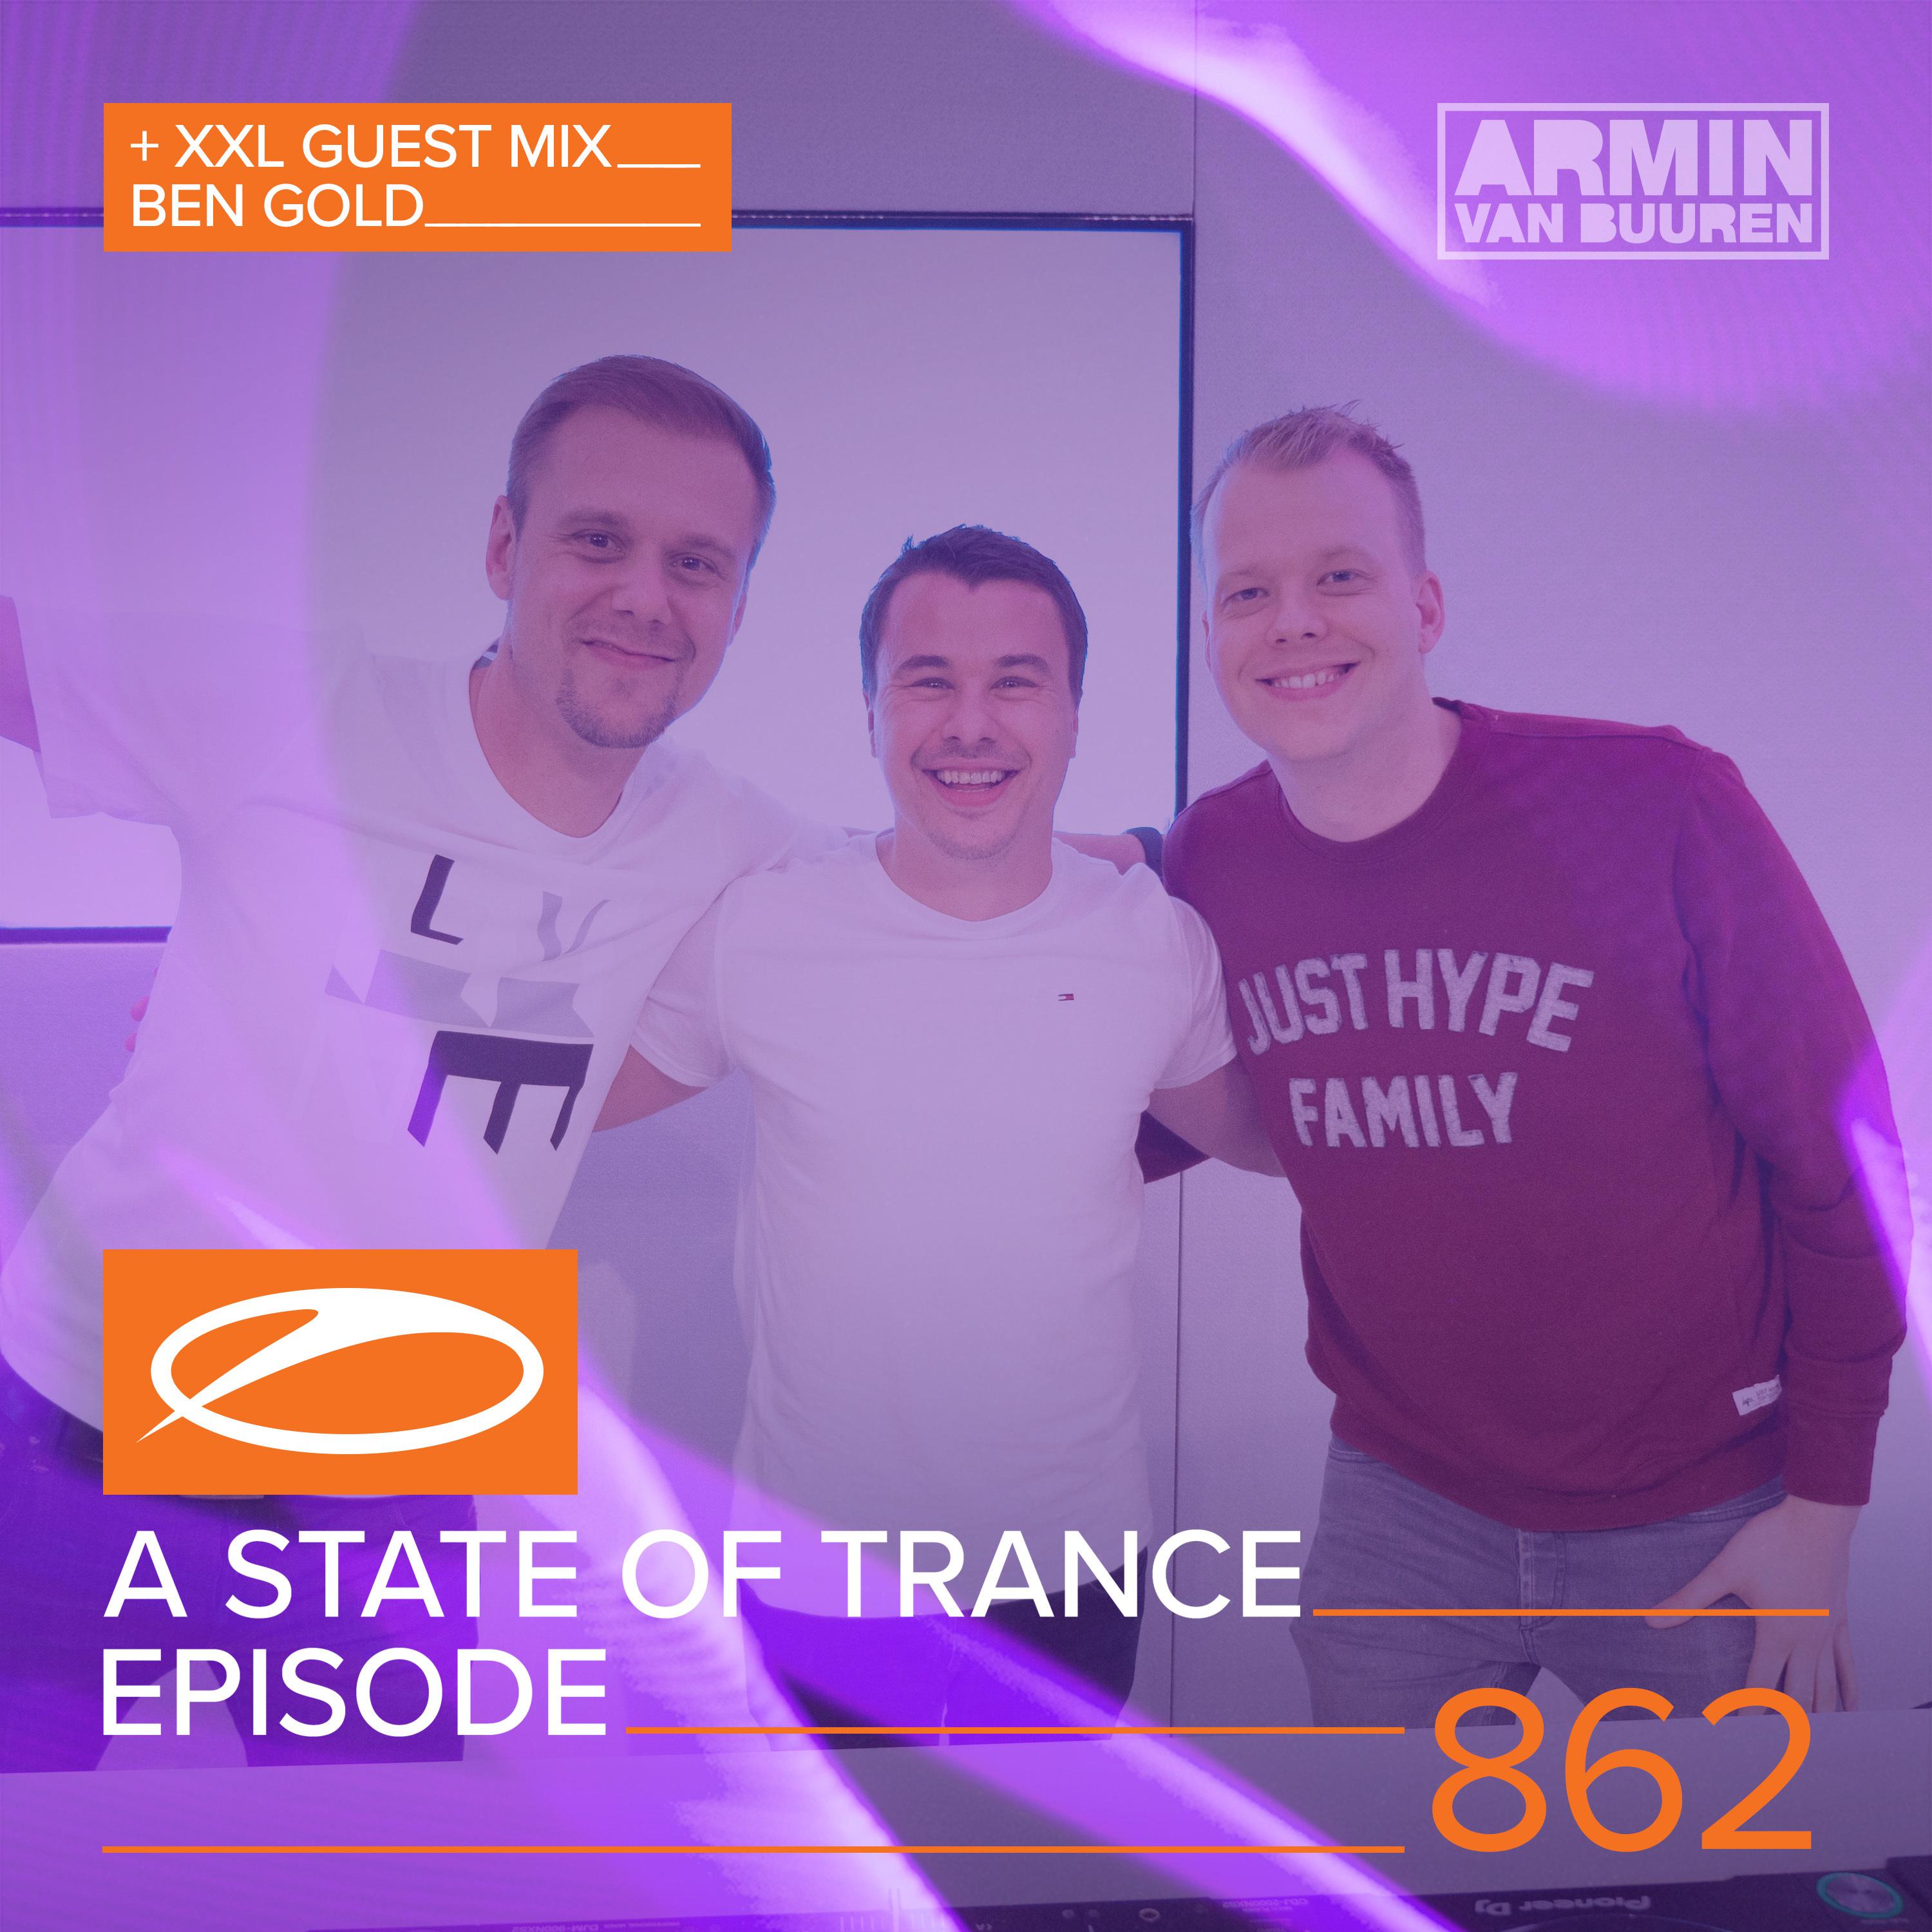 Just As You Are (ASOT 862)